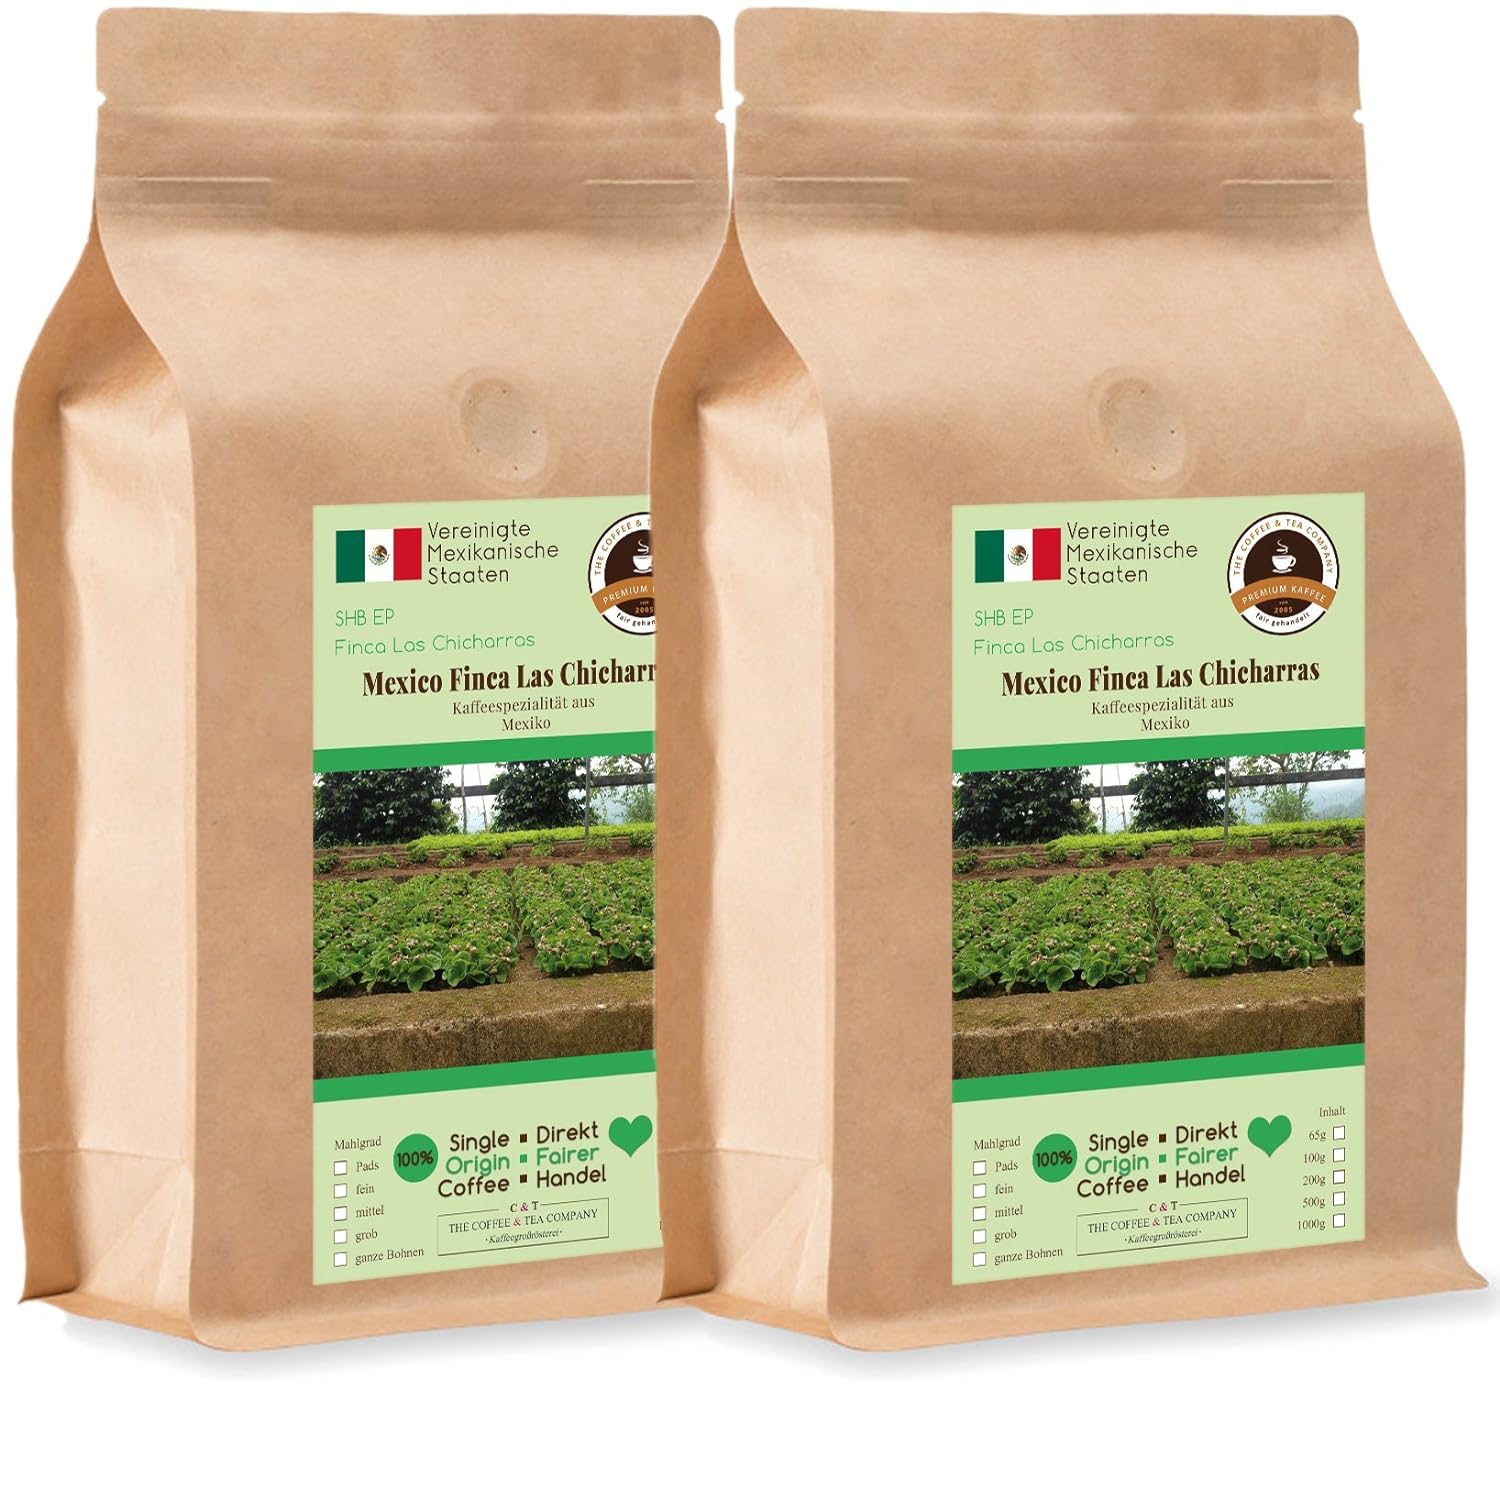 Coffee Globetrotter - Coffee with Heart - Mexico Finca Las Chicharras - 2 x 1000 g Medium Ground - for Fully Automatic Coffee Grinder - Roasted Coffee Fair Trade | Refill Pack Economy Pack